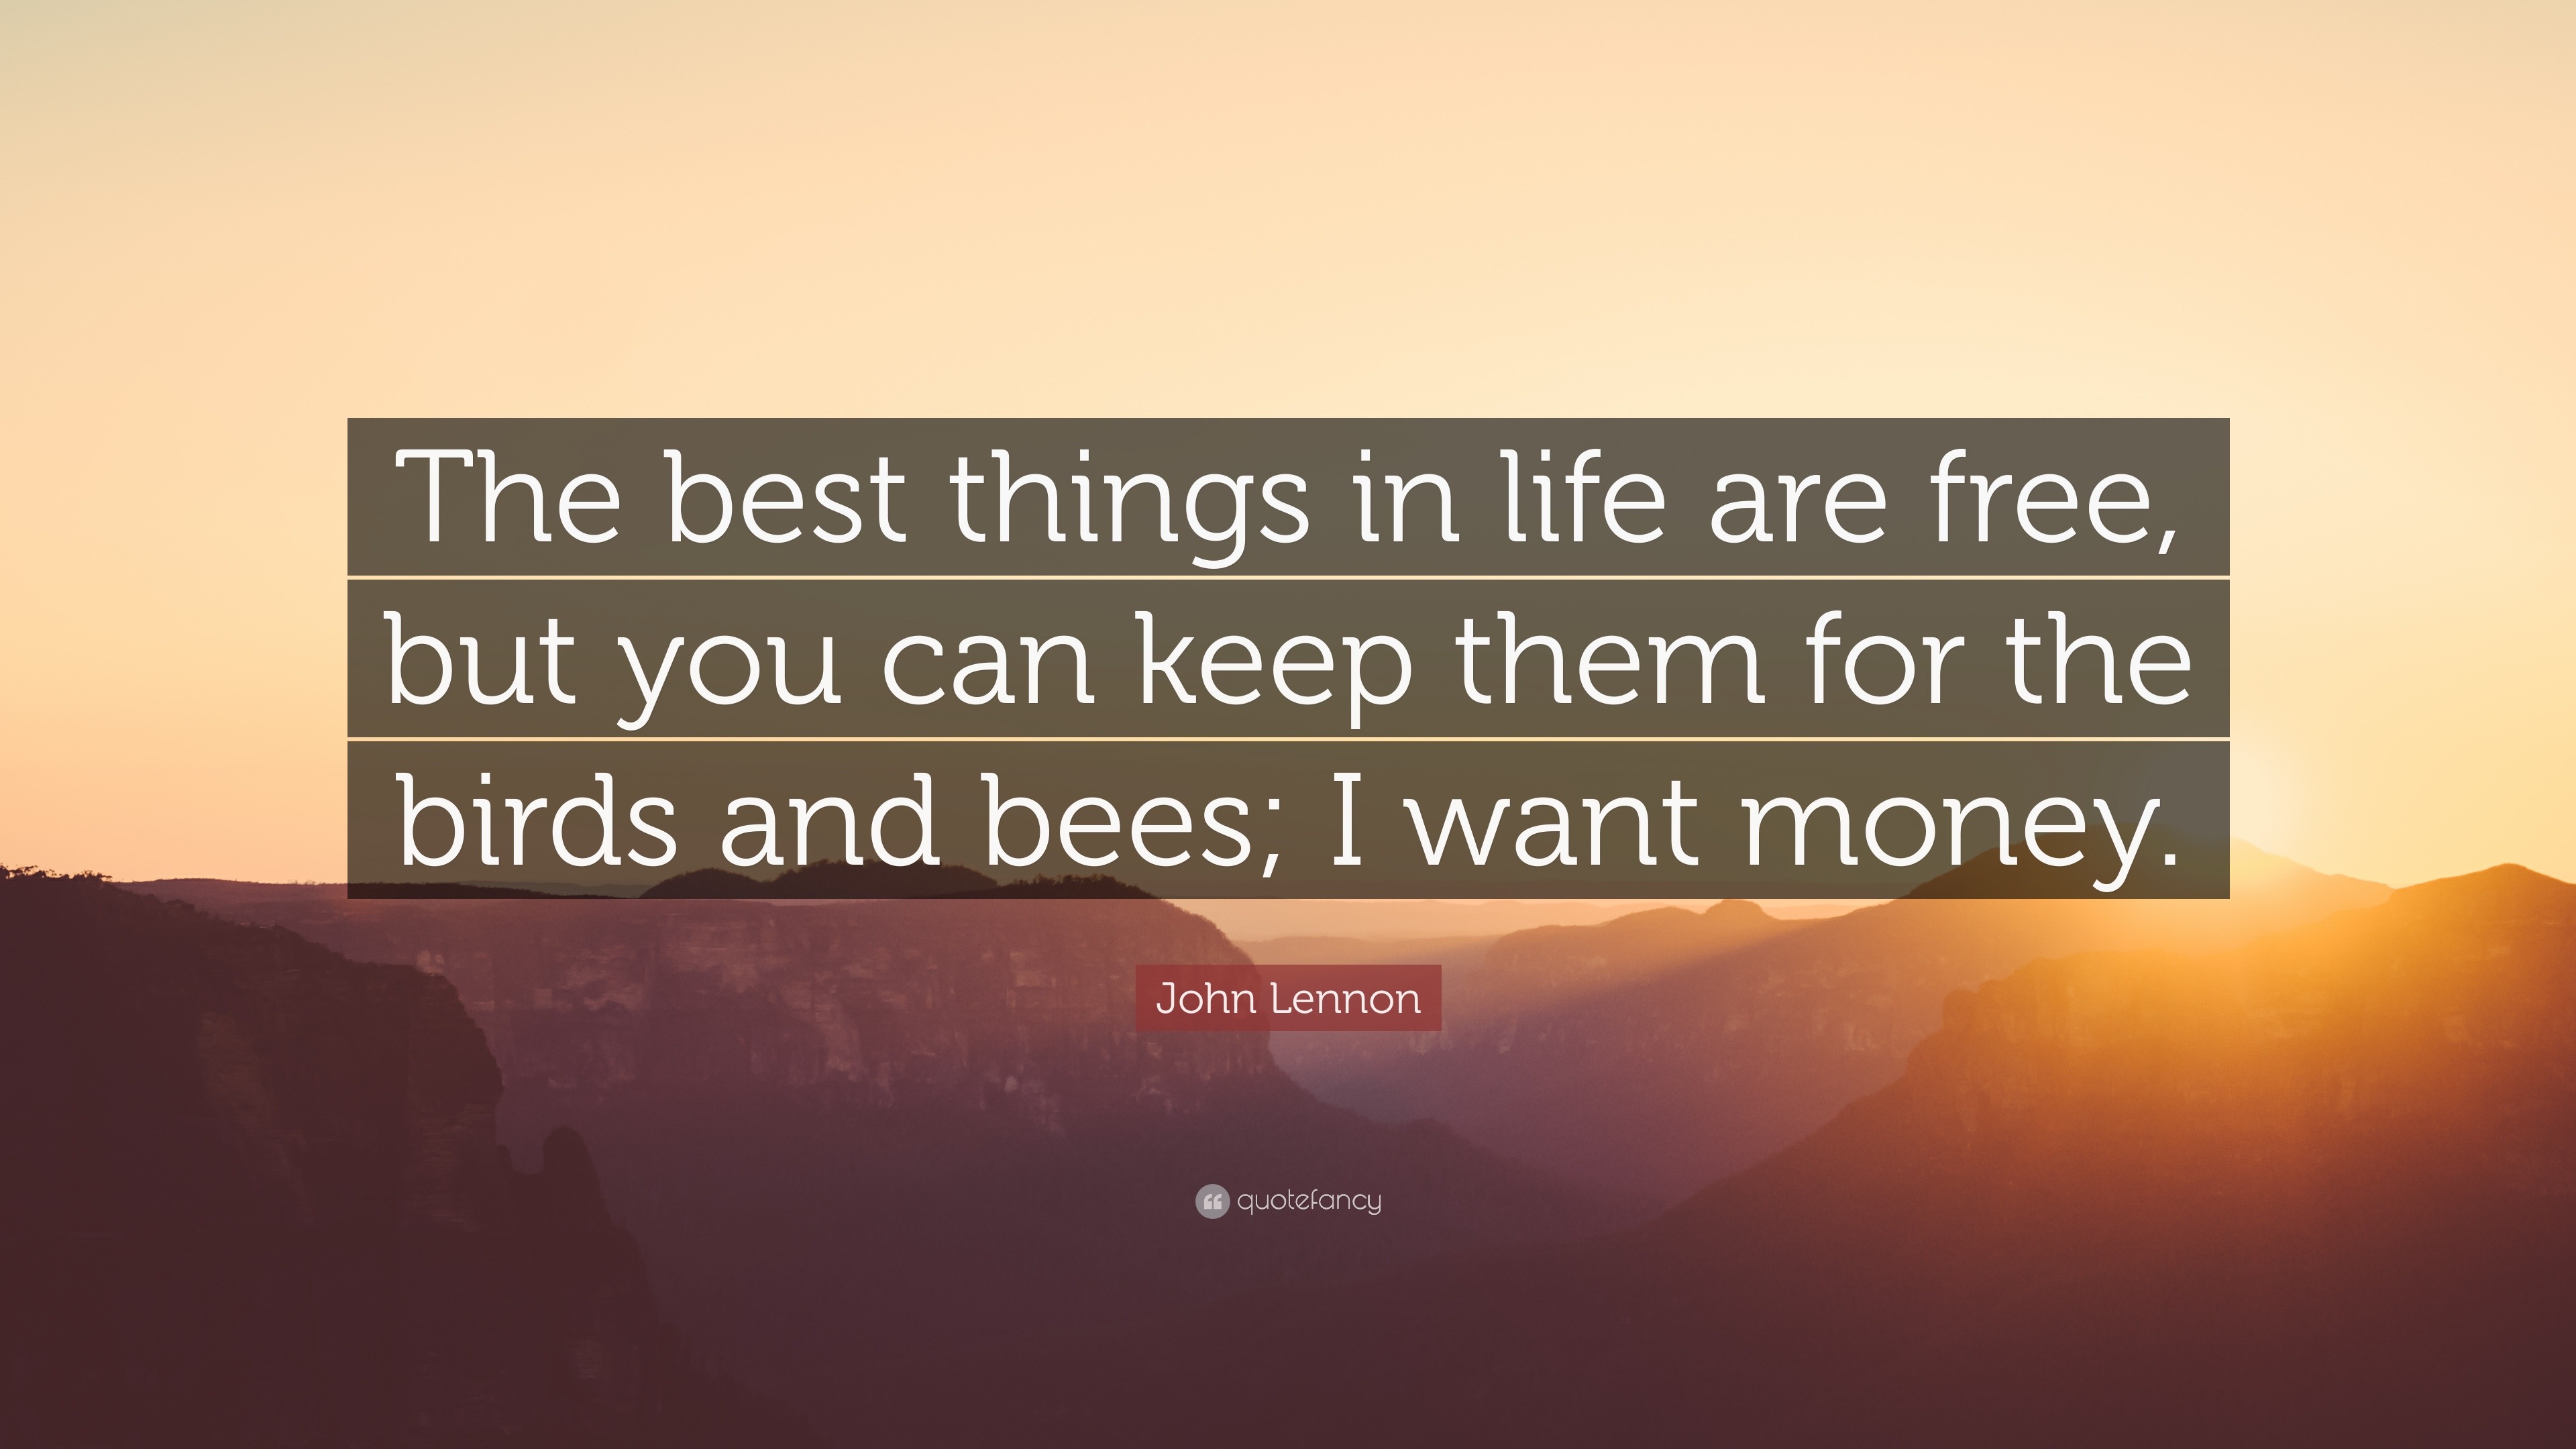 John Lennon Quote “The best things in life are free but you can